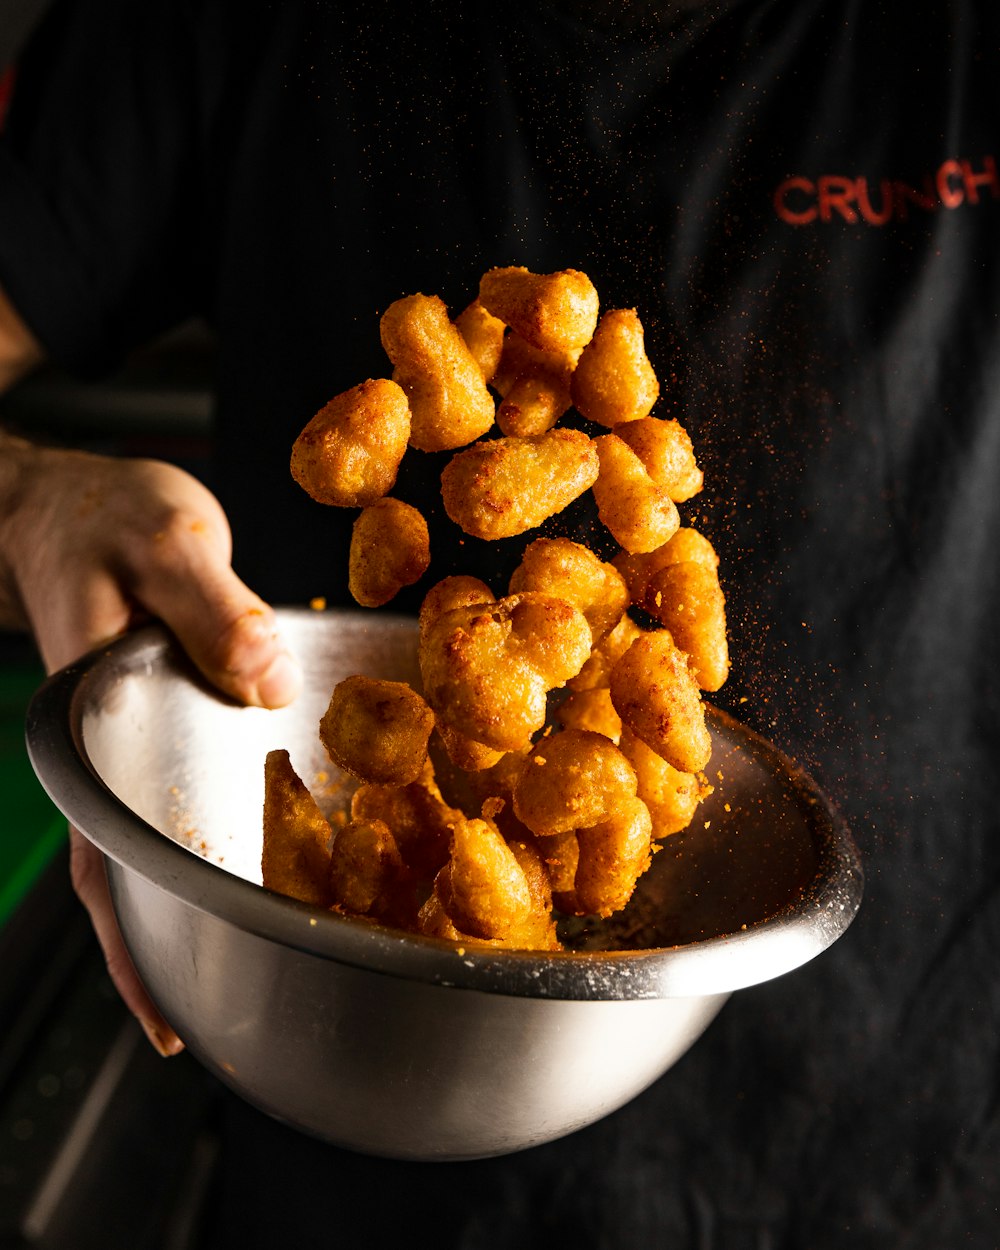 a person holding a bowl of fried food